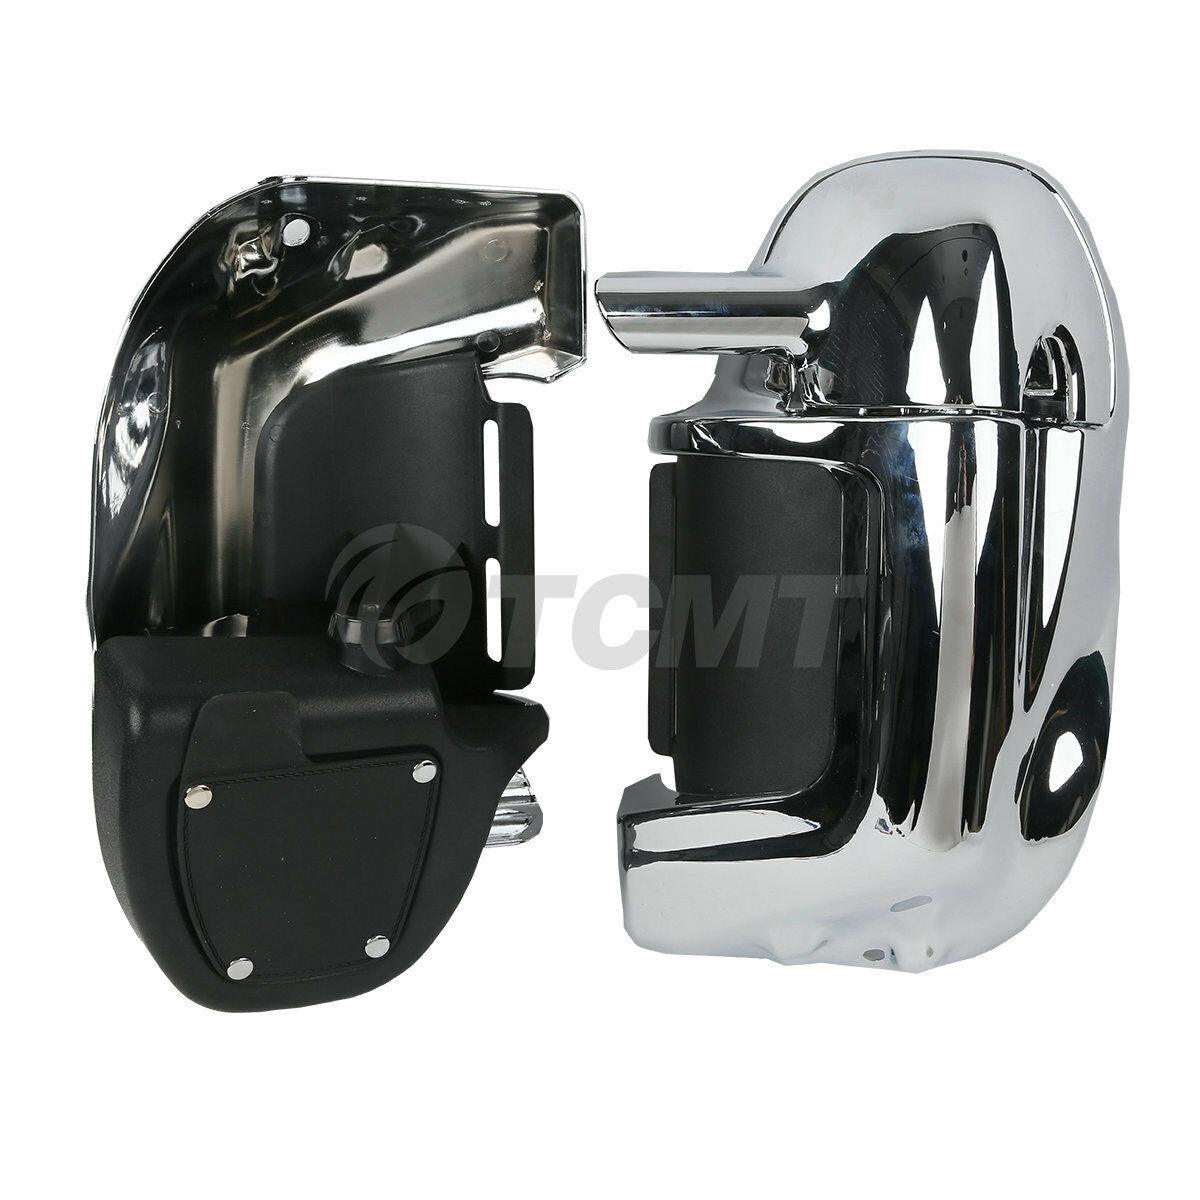 Chrome Lower Vented Fairing Fit For Harley Touring Road Electra Glide 1983-2013 - Moto Life Products